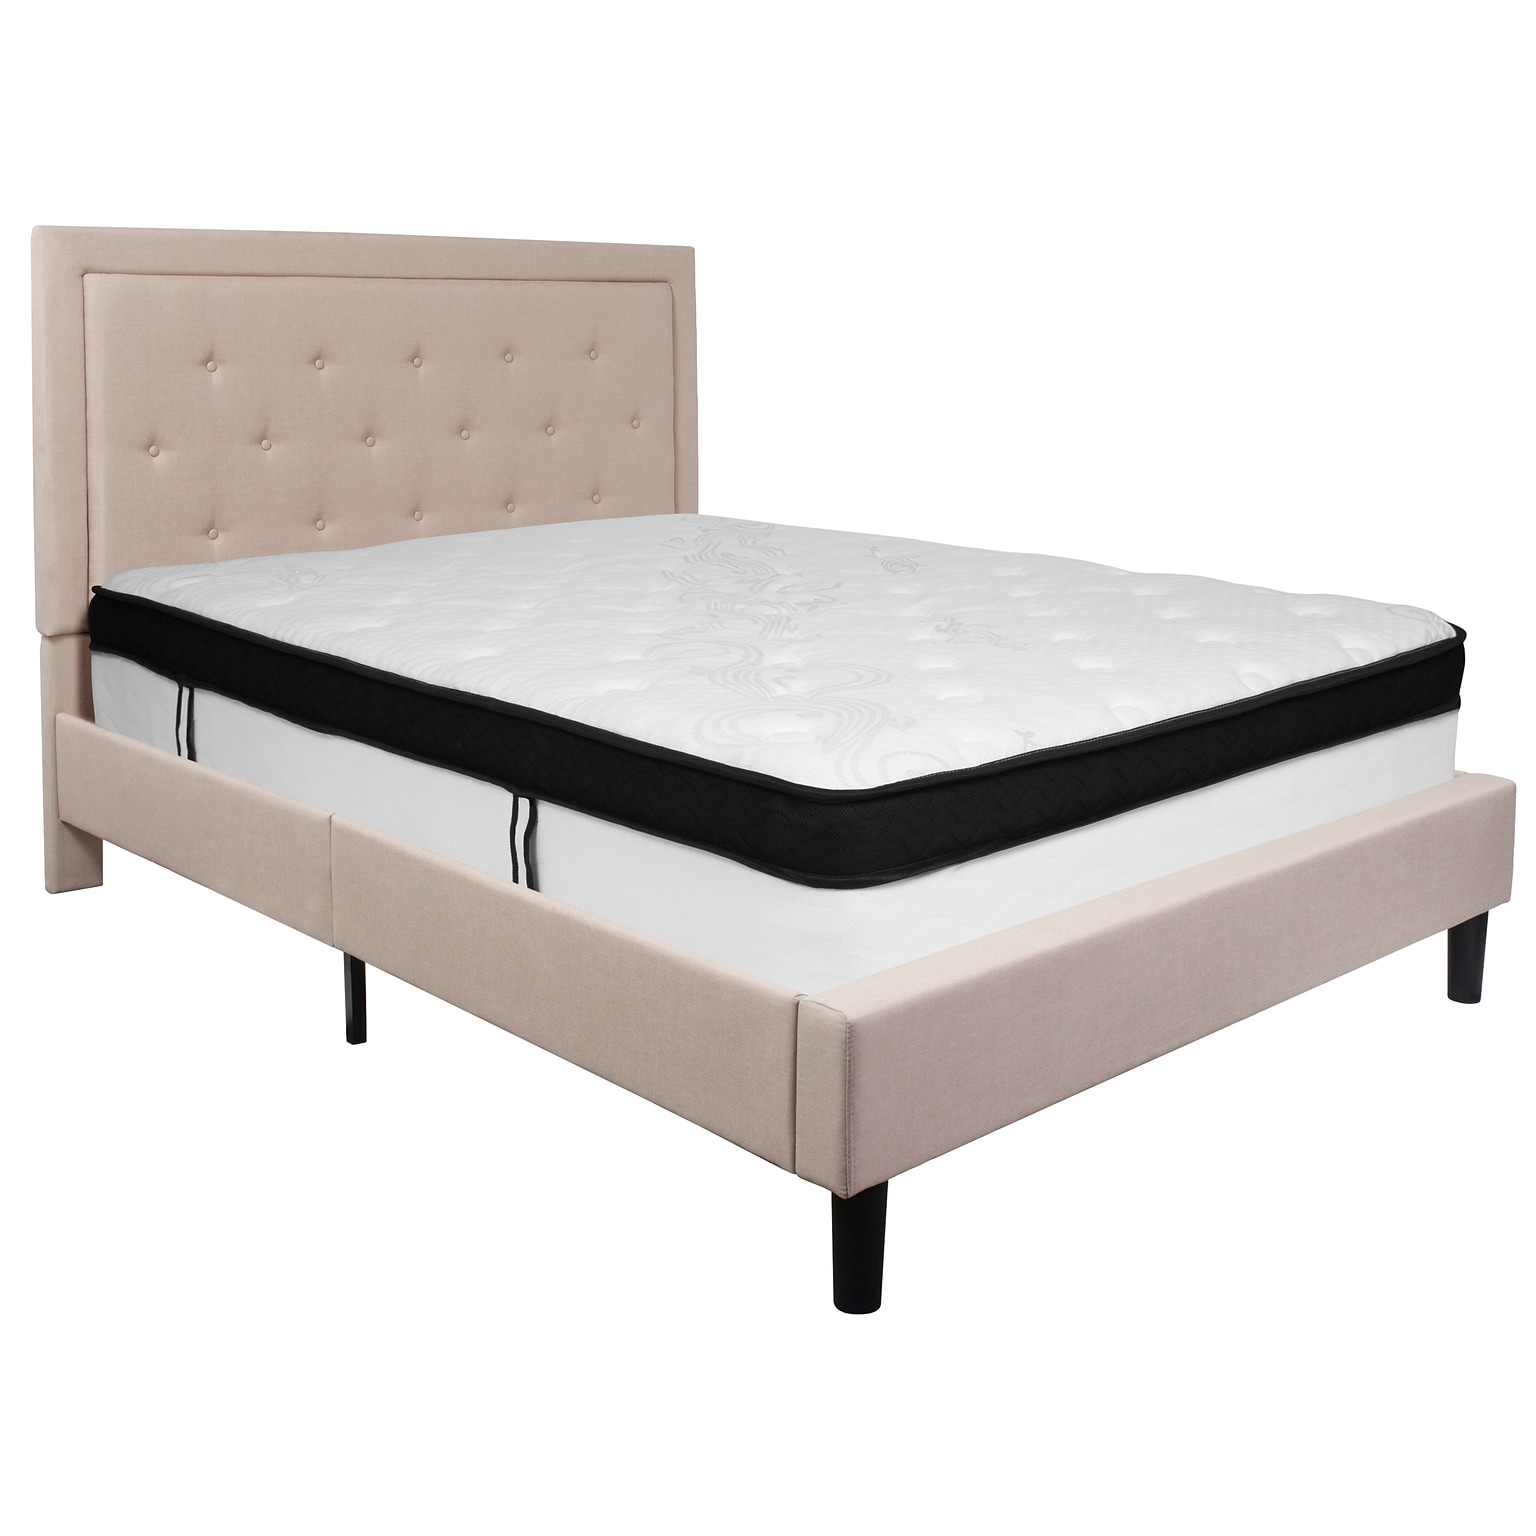 Flash Furniture Roxbury Tufted Upholstered Platform Bed in Beige Fabric with Memory Foam Mattress, Queen (SLBMF19)